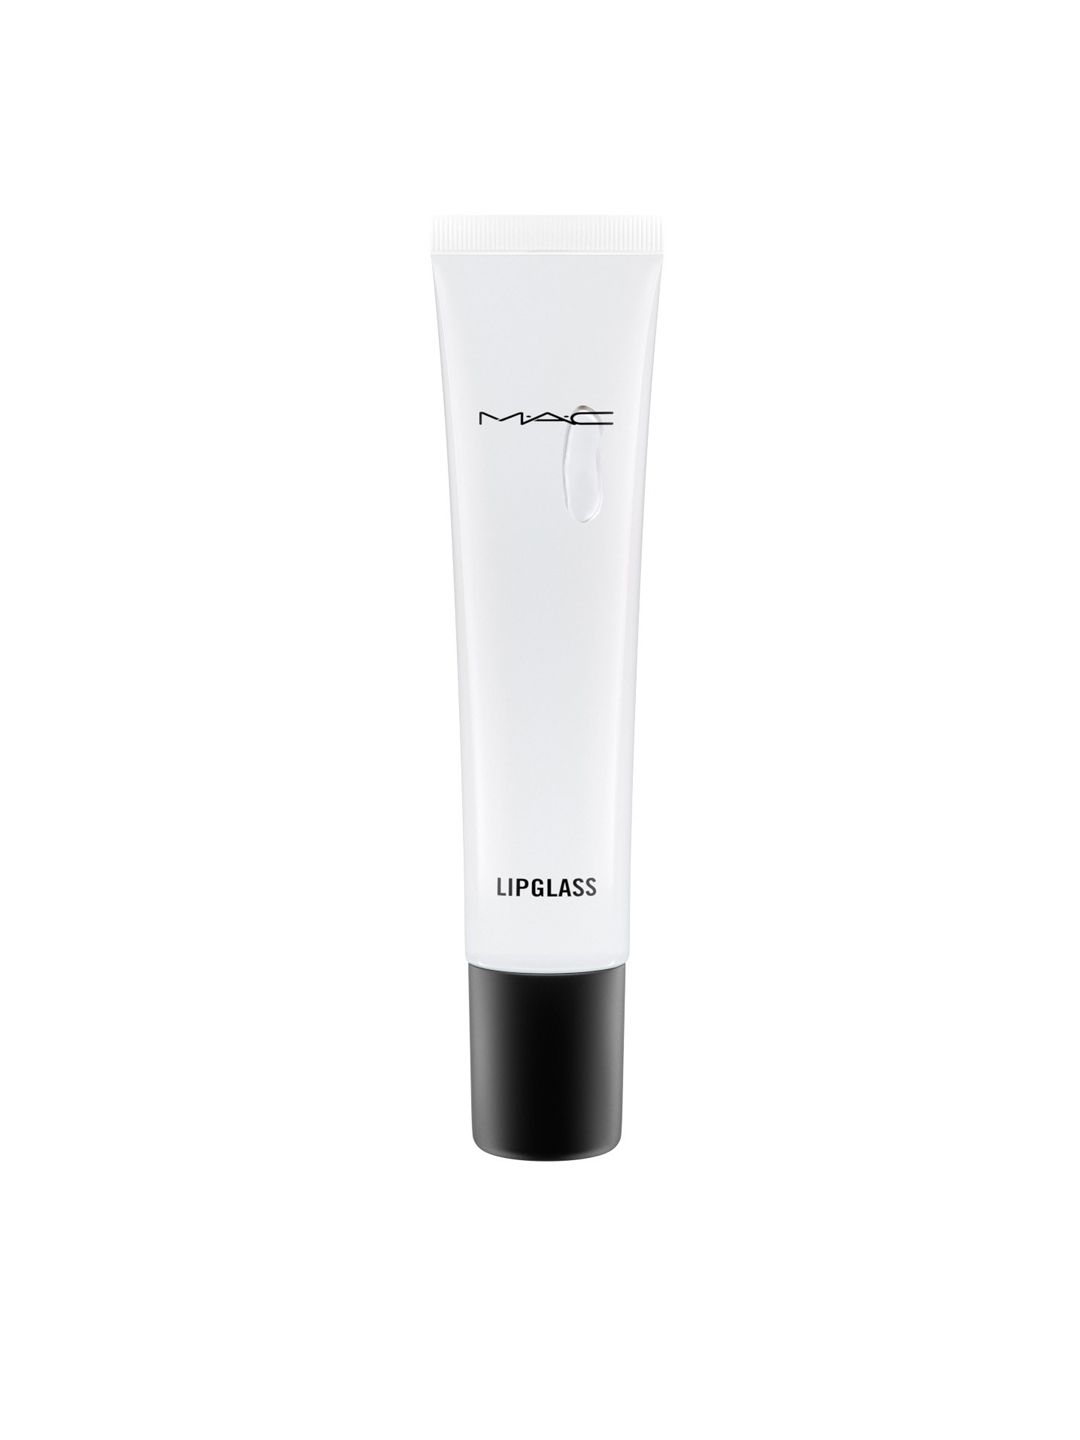 M.A.C Lipglass - Clear 15 ml Price in India